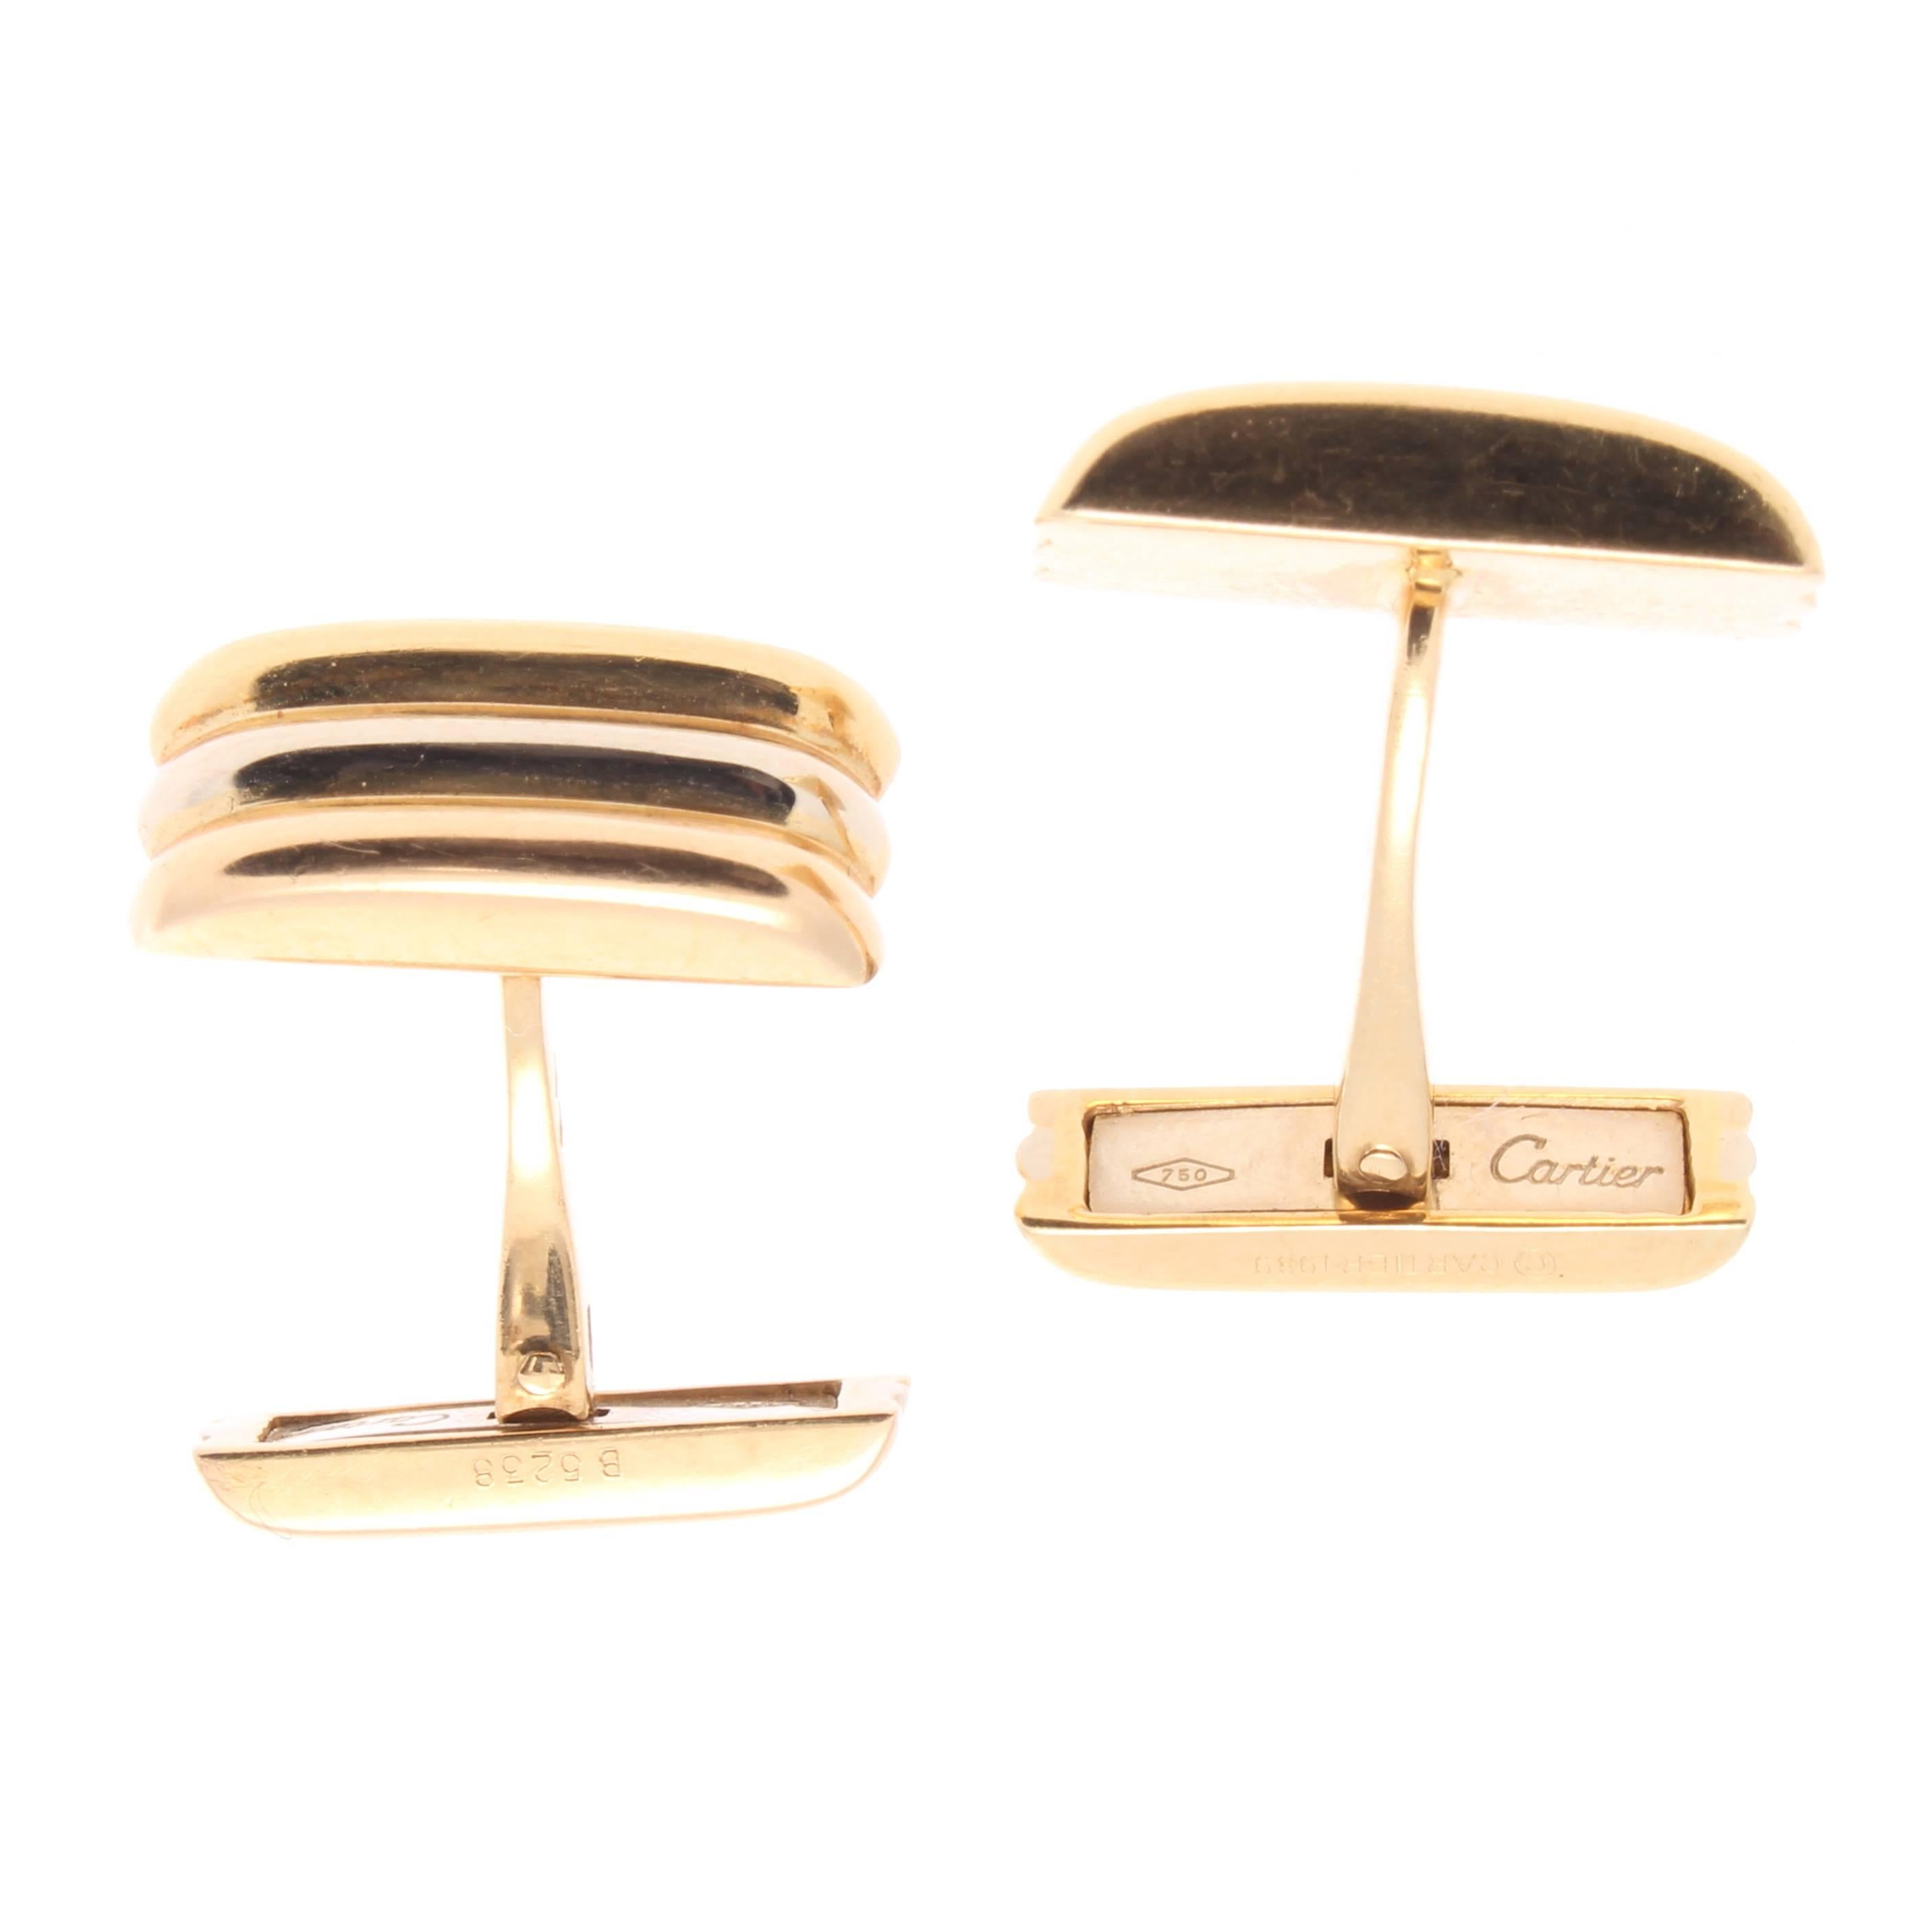 Cartier, elegant and timeless. The cufflinks have been designed in the classic use of tricolor 18k gold; pink for love, yellow for fidelity and white for friendship. Signed Cartier and numbered.
